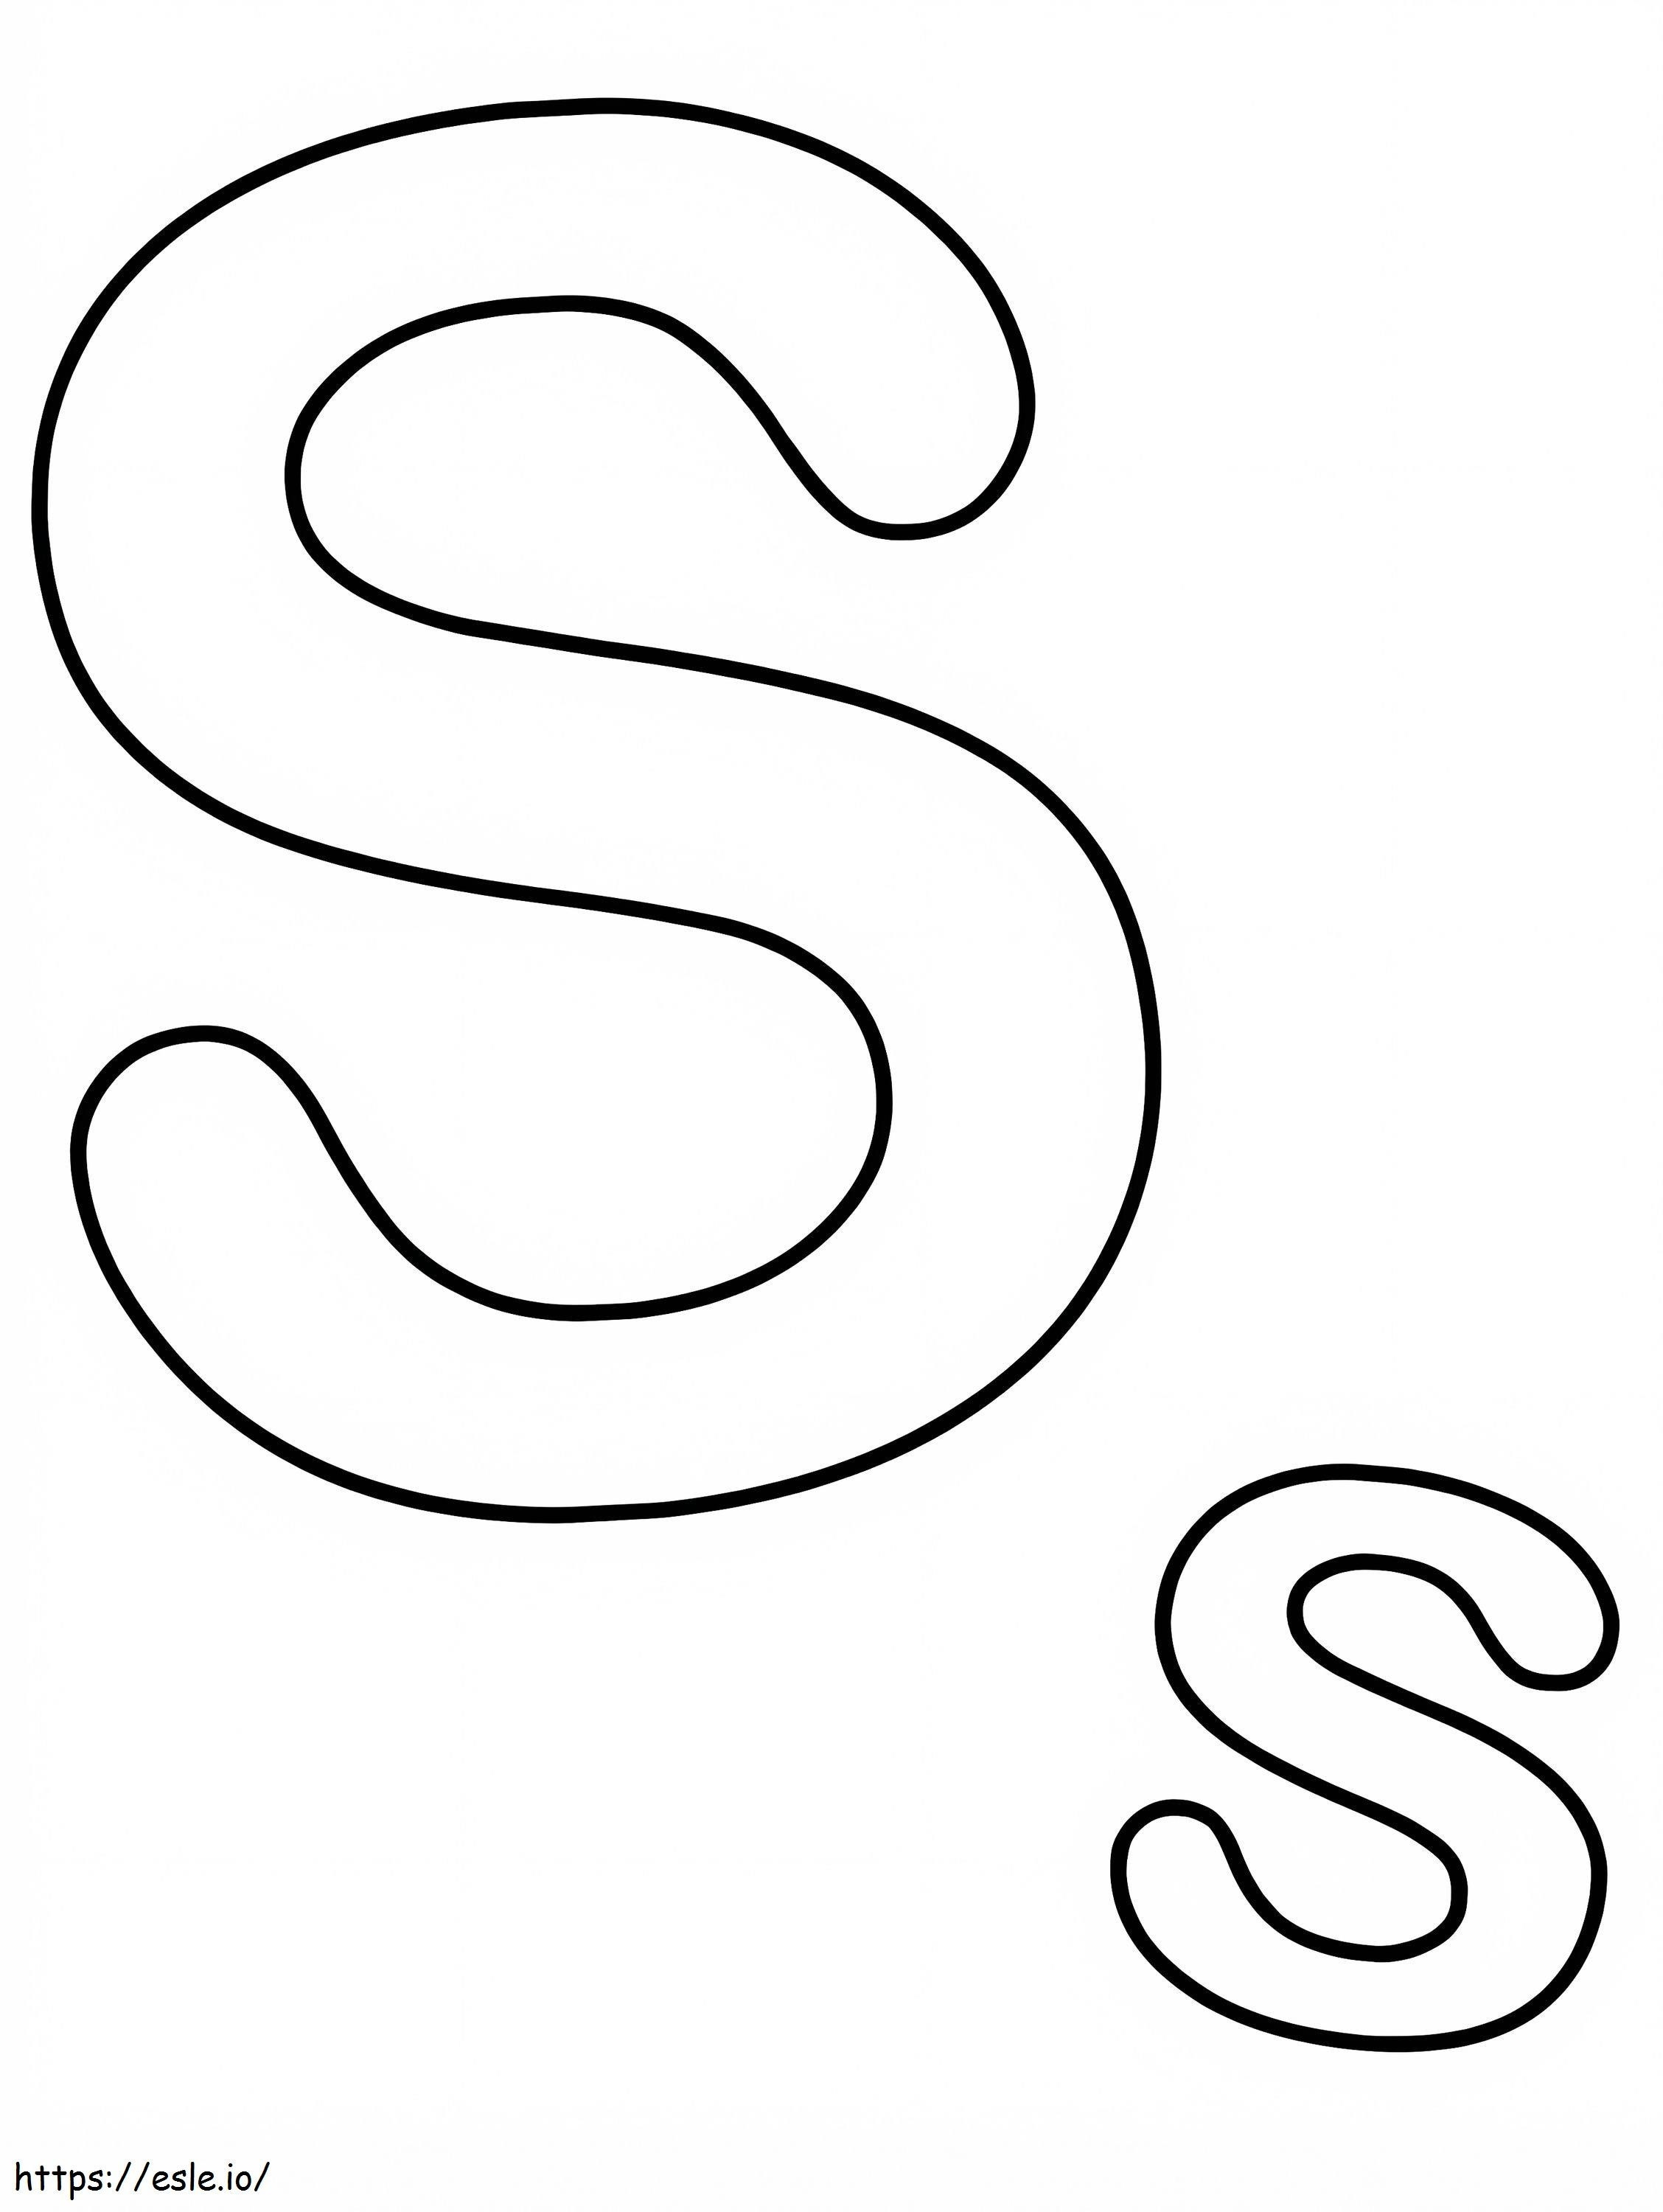 Letter S 2 coloring page